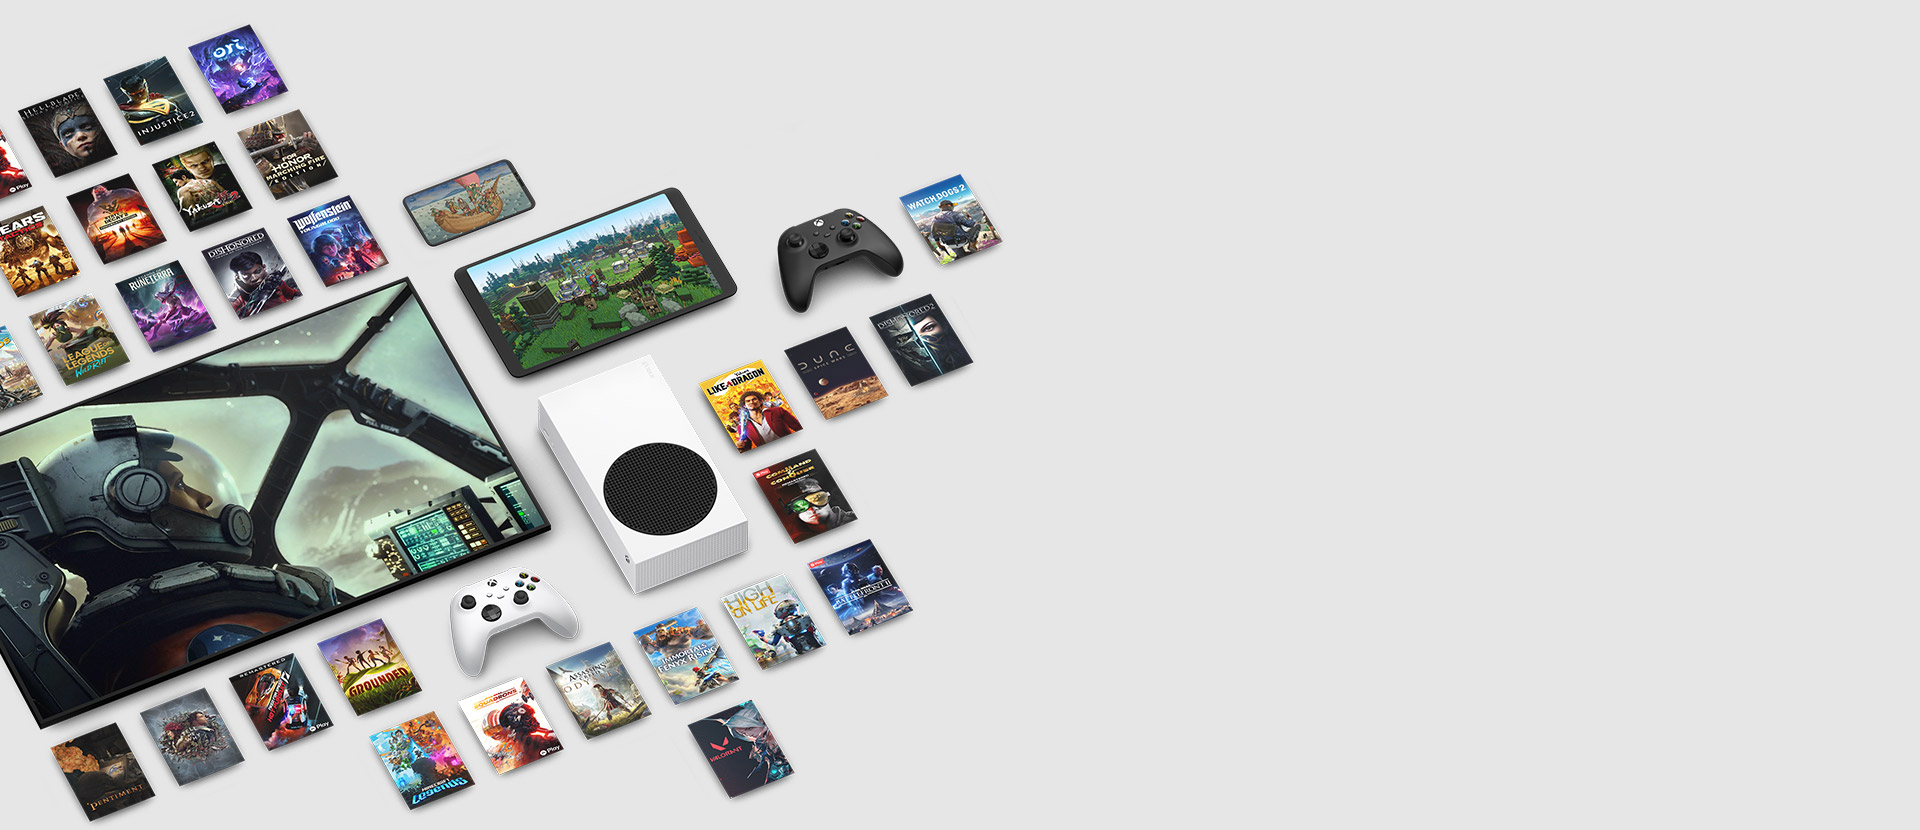 Game art from multiple games available now with Xbox Game Pass Ultimate surround multiple devices, including a console, mobile phone, tablet, smart TV and controllers.